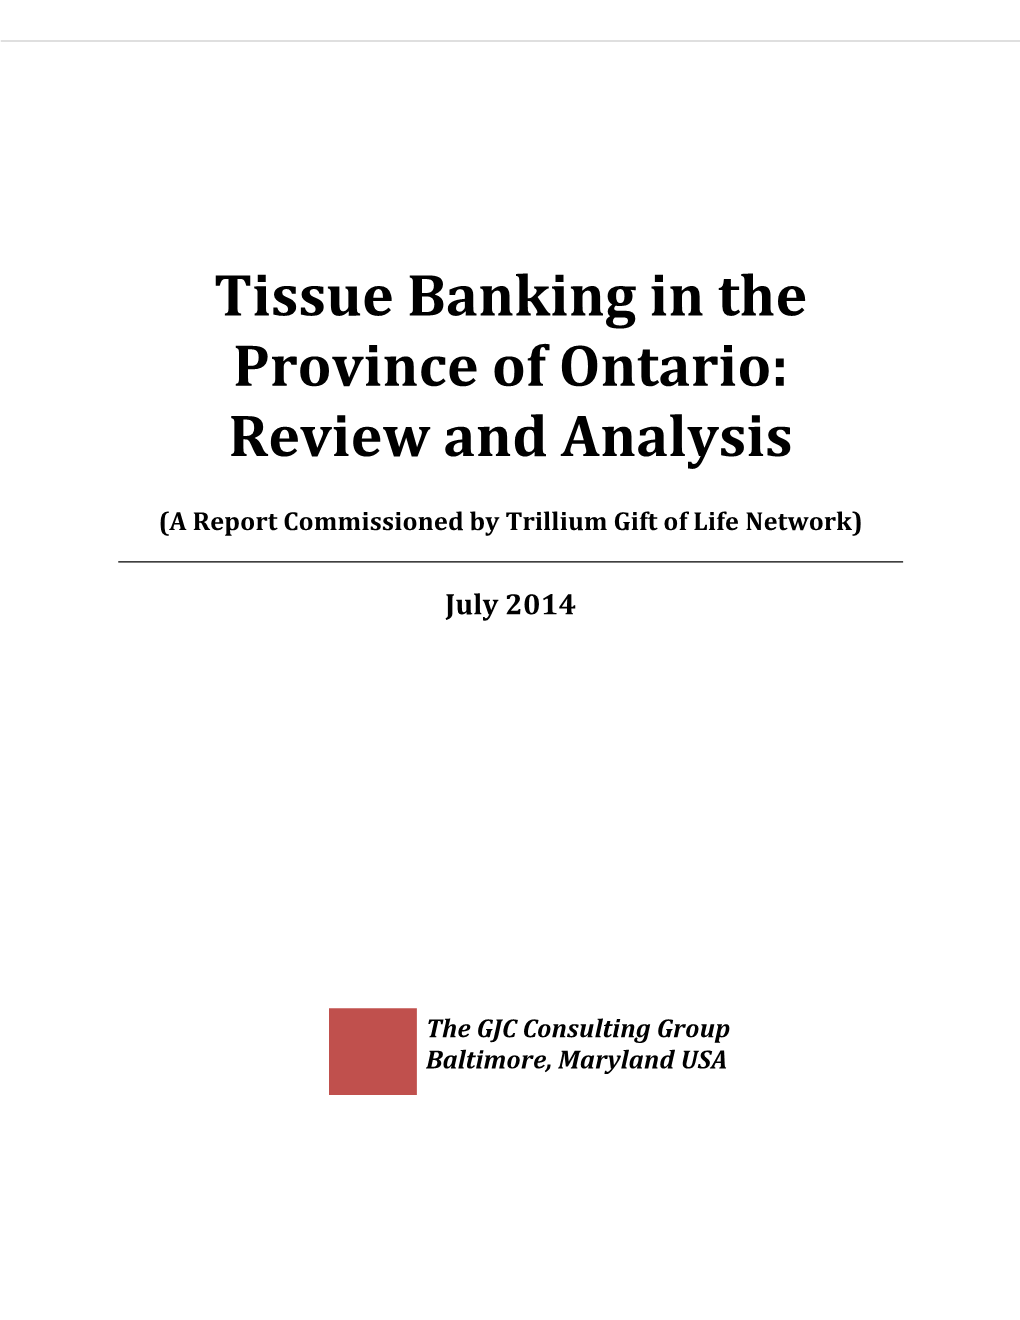 Tissue Banking in the Province of Ontario: Review and Analysis